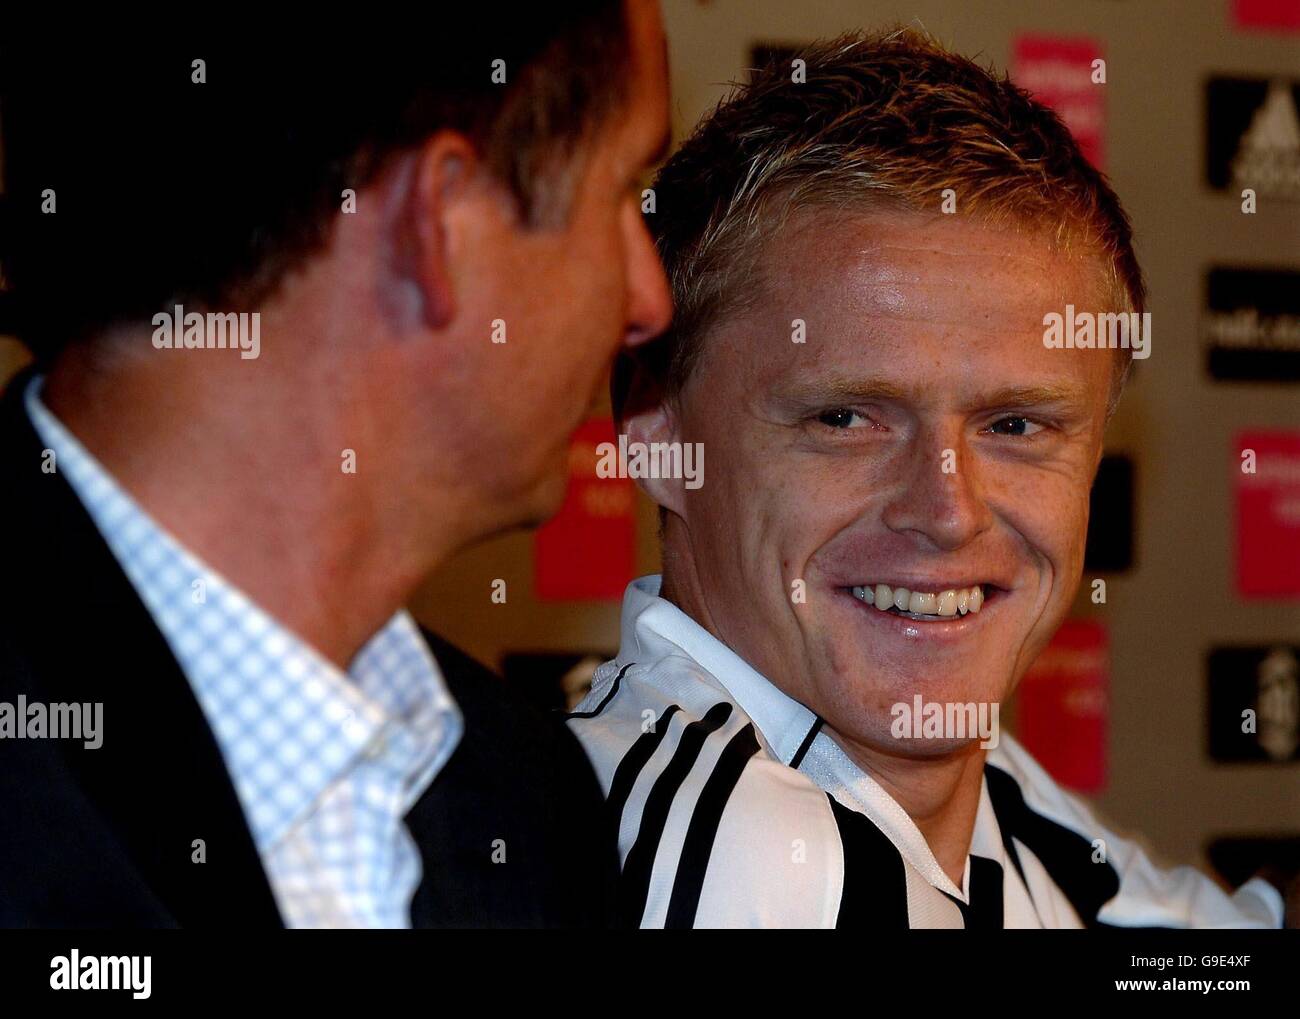 Newcastle United's new signing Damien Duff with manager Glenn Roeder during a press conference at St James' Park, Newcastle. Stock Photo